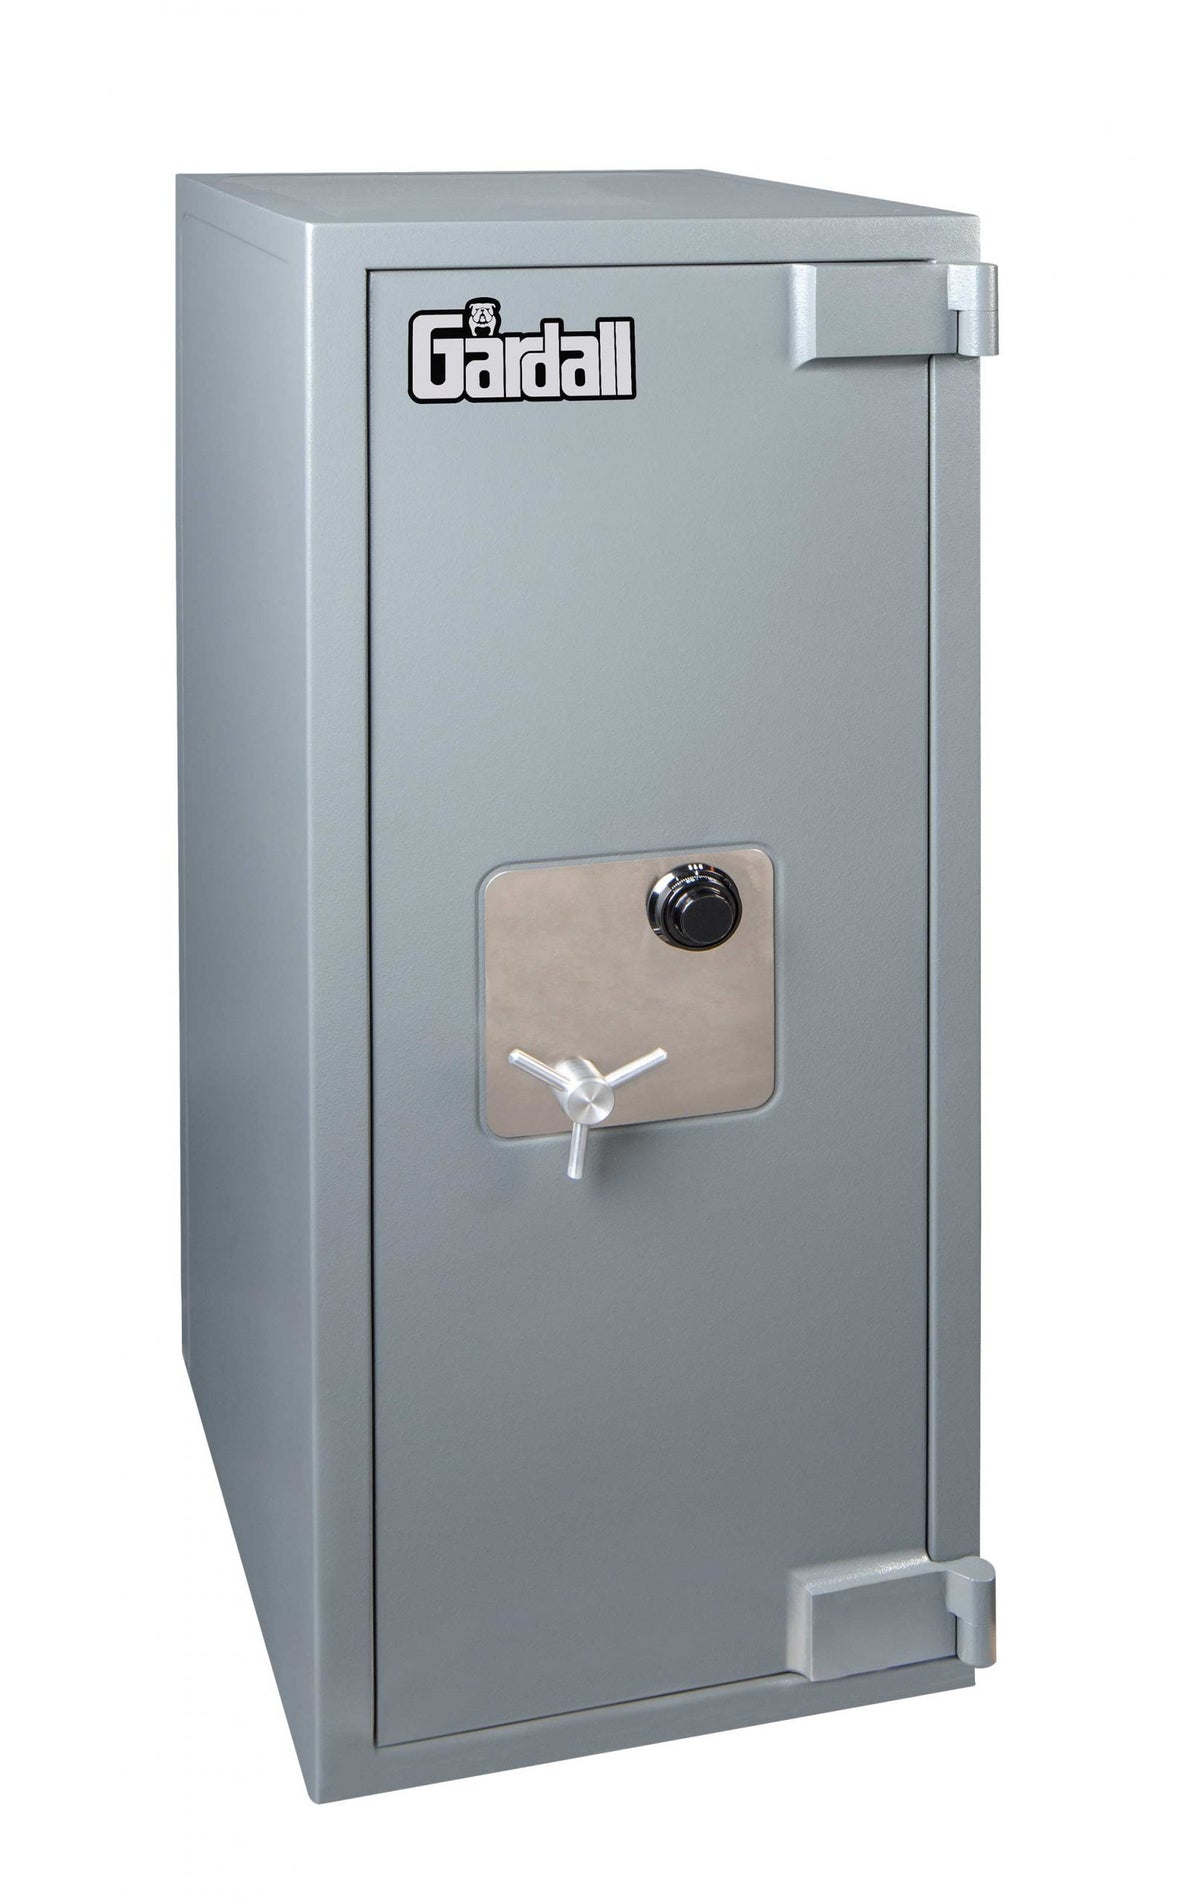 Gardall TL30-7236 TL-30 Commercial High Security Safe